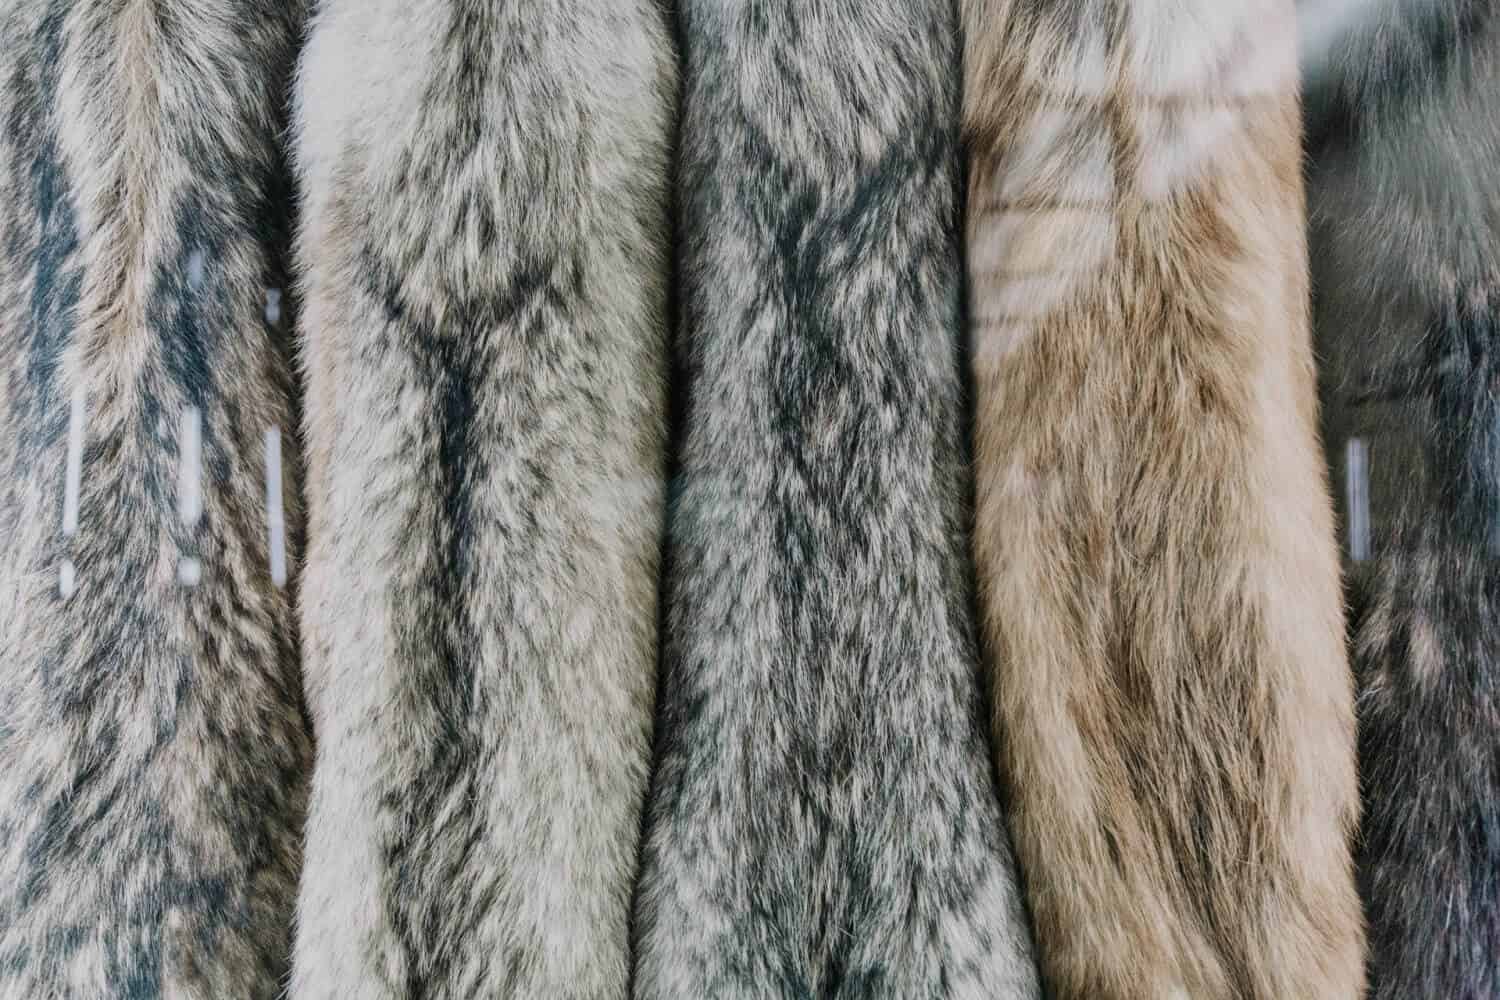 How to Wash Faux Fur Without Damaging It